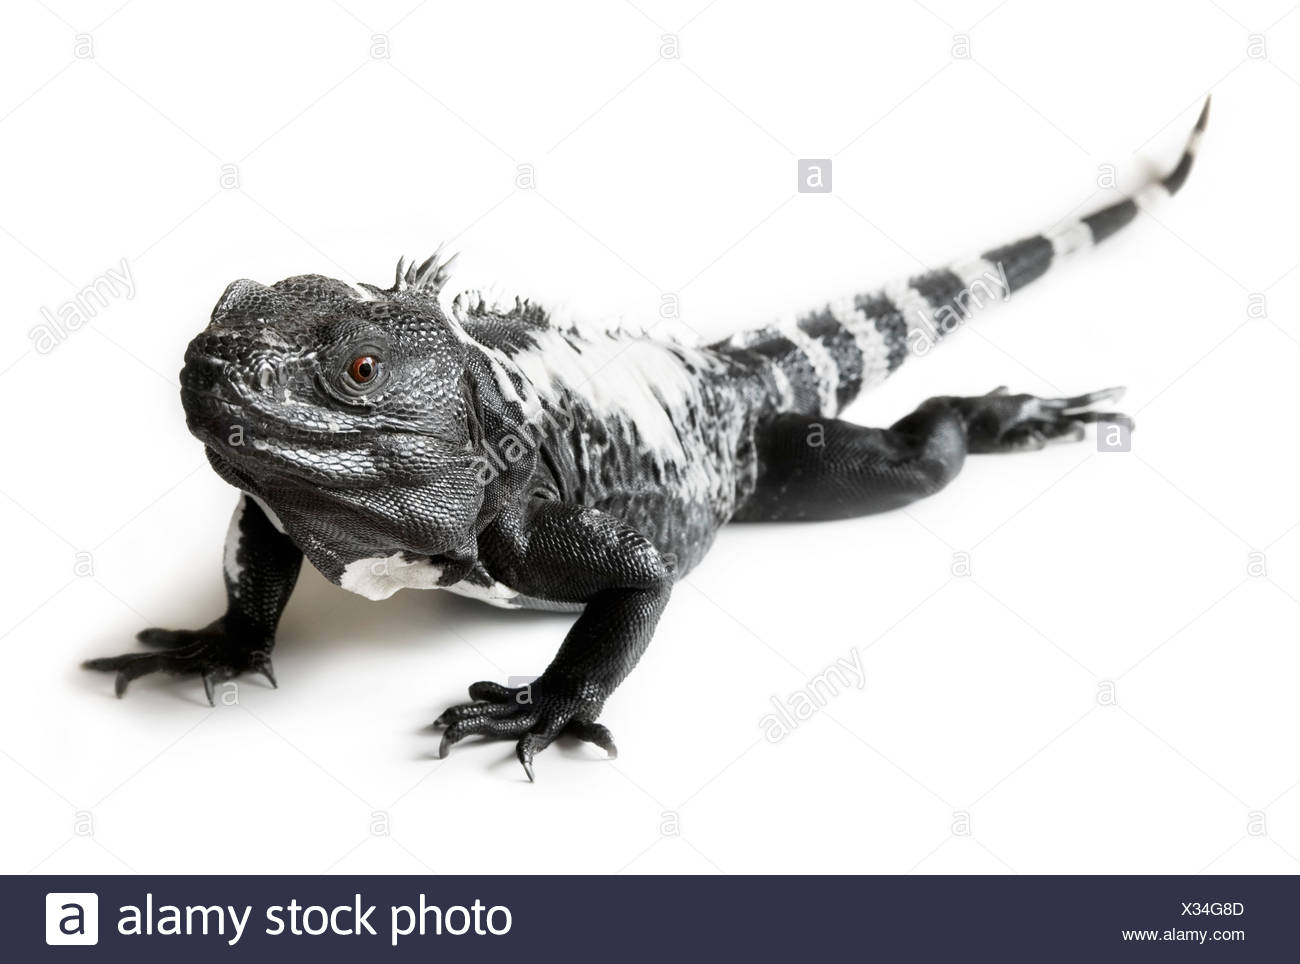 Black and white spiny tailed iguana in a studio setting Stock Photo - Alamy